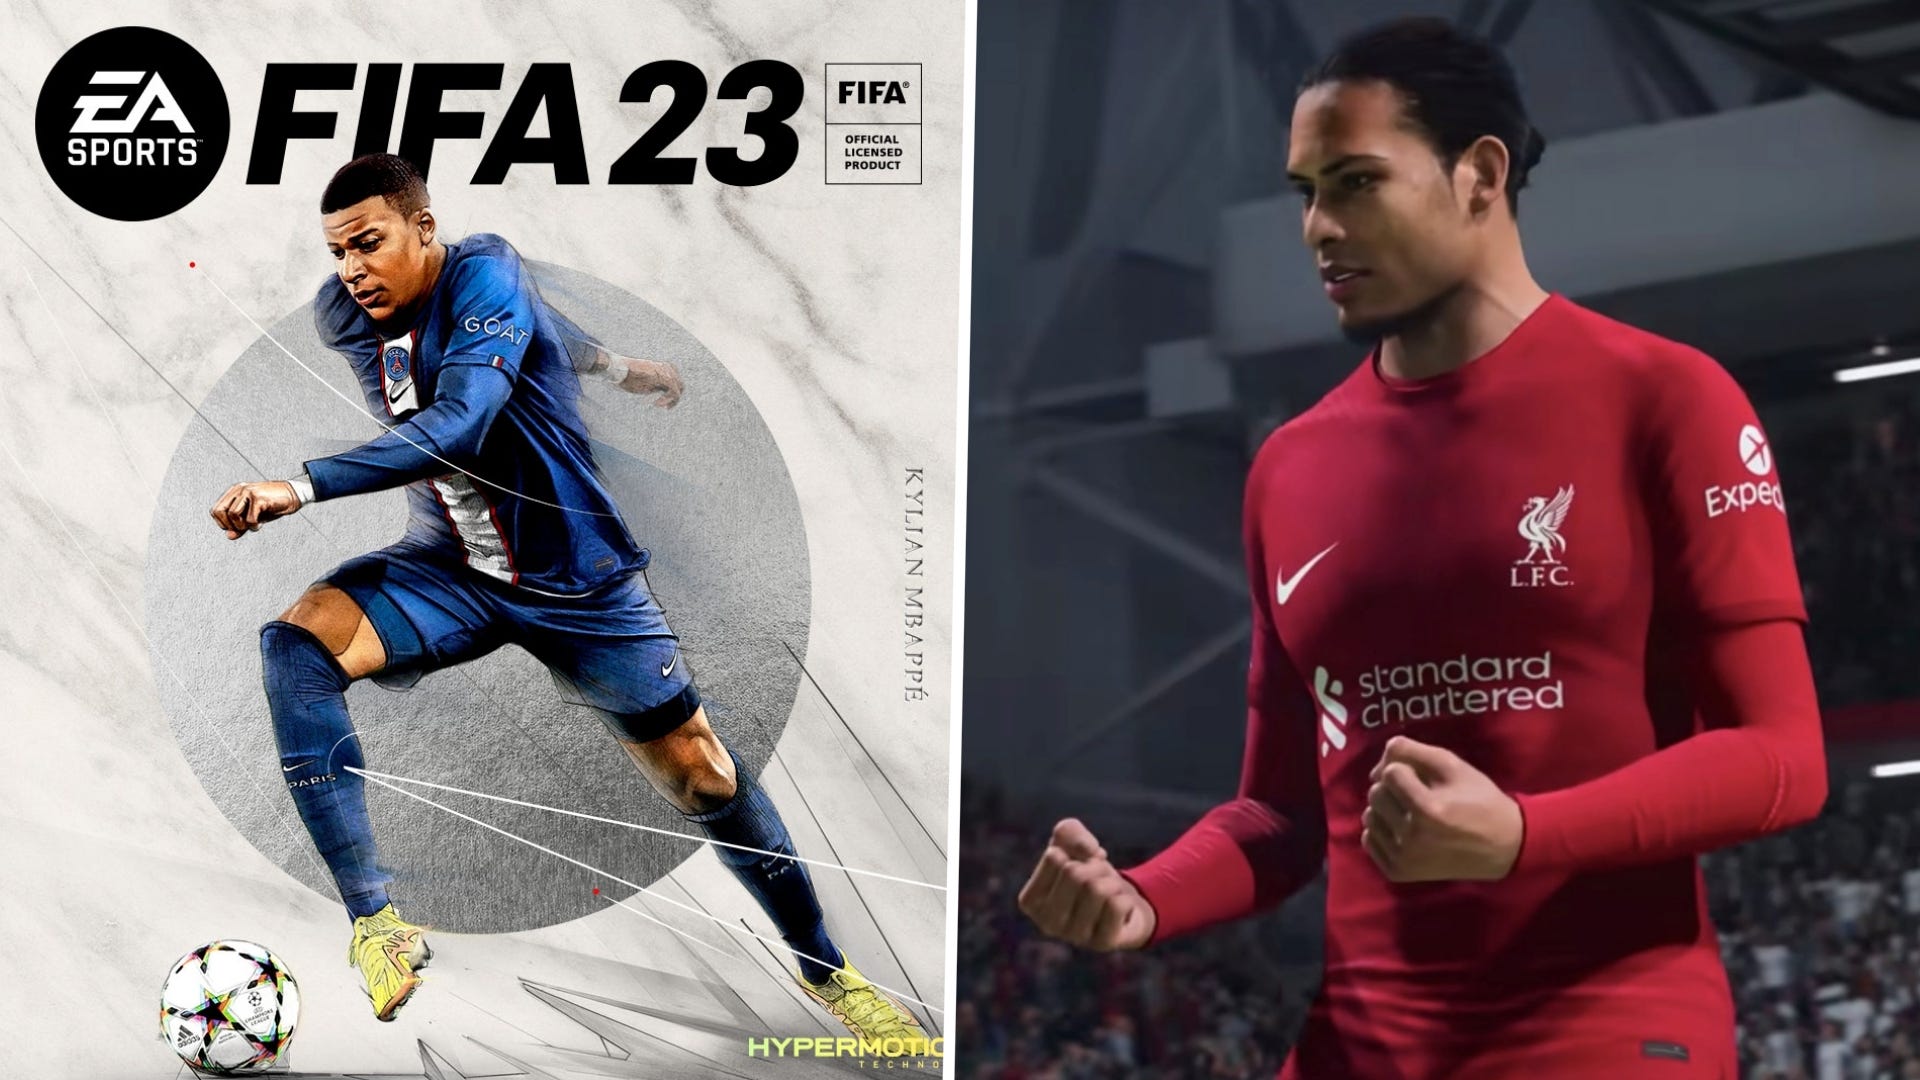 FIFA 23 review: Cut the glitz & glamour - superior gameplay experience does the talking | Goal.com India